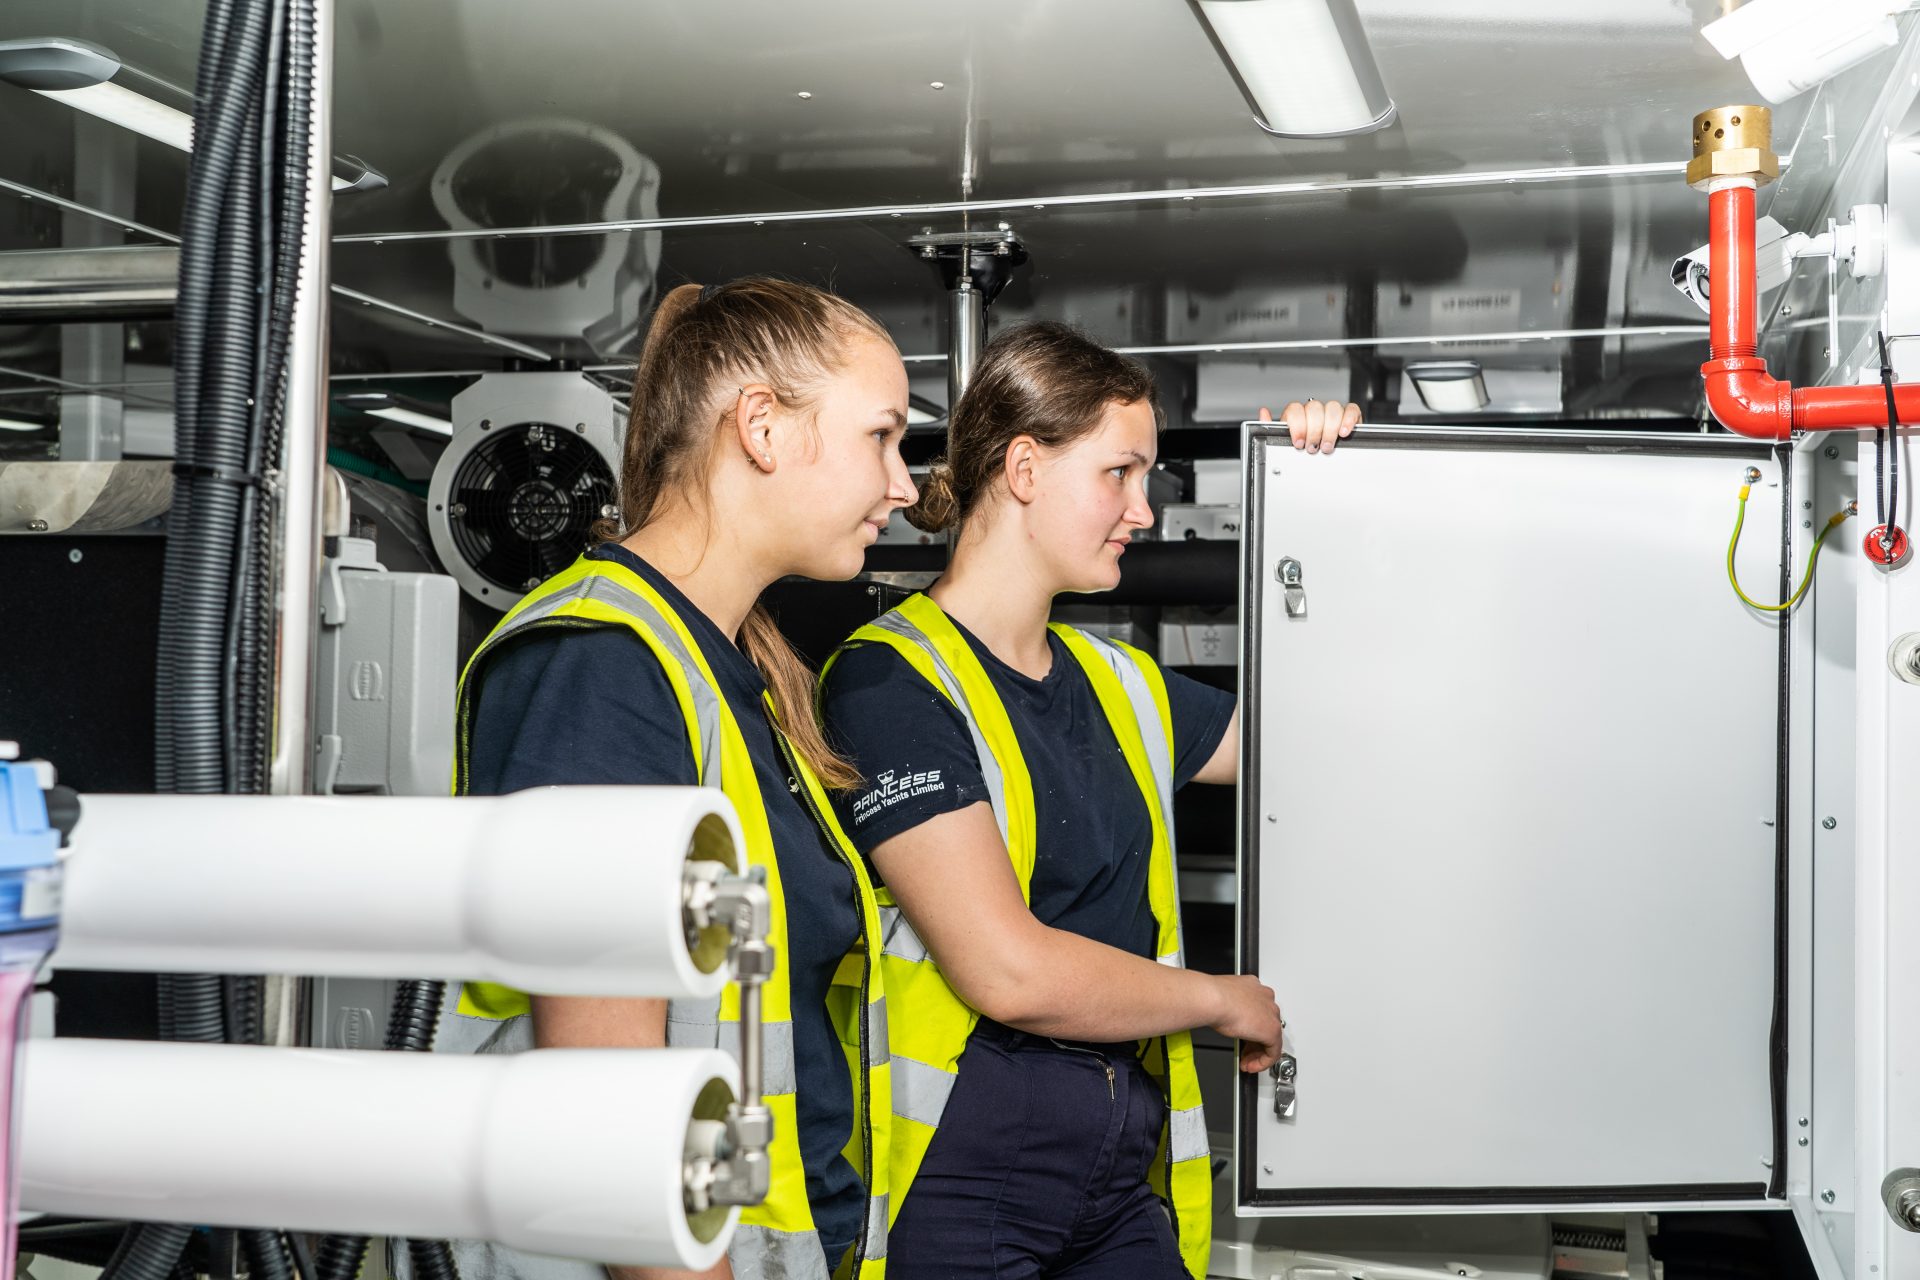 Two Princess Yachts apprentices working in boat engine room